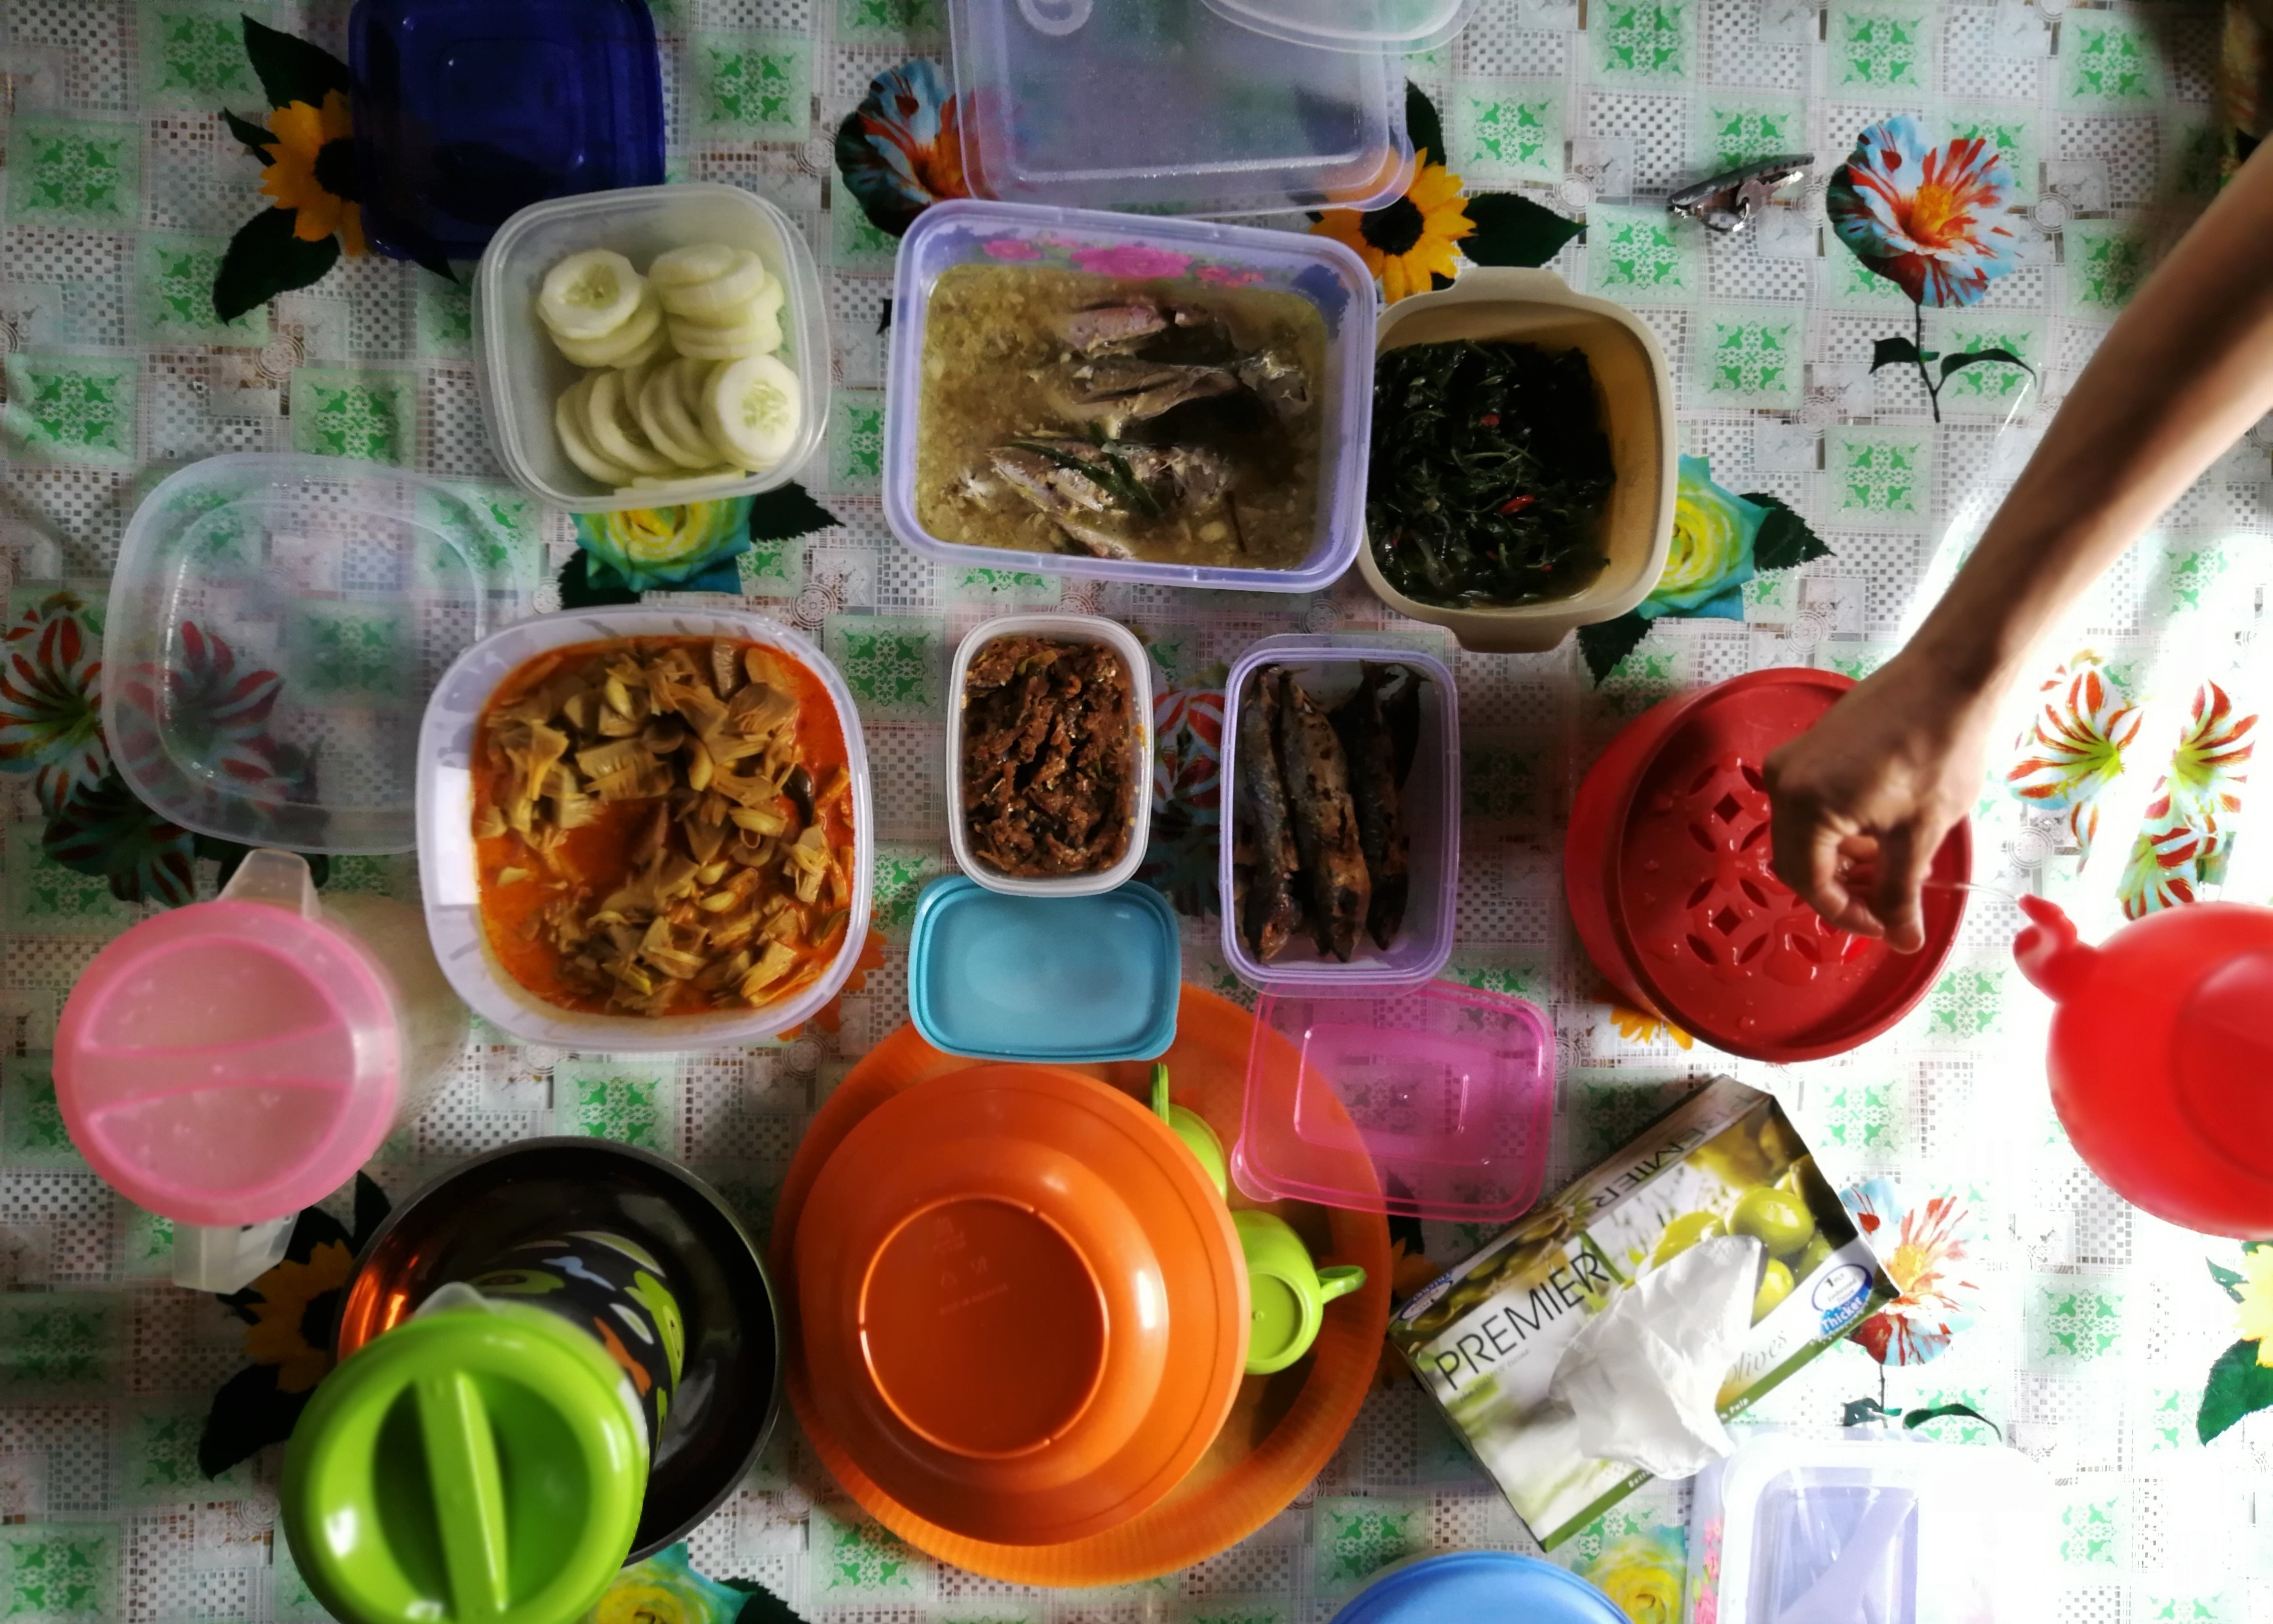 A feast awaits hungry hikers who brave the Leech Trail in hope of spotting the rare rafflesia — several types of locally-caught river fish, at least three kinds of sambal (chilli paste), and wild ferns.